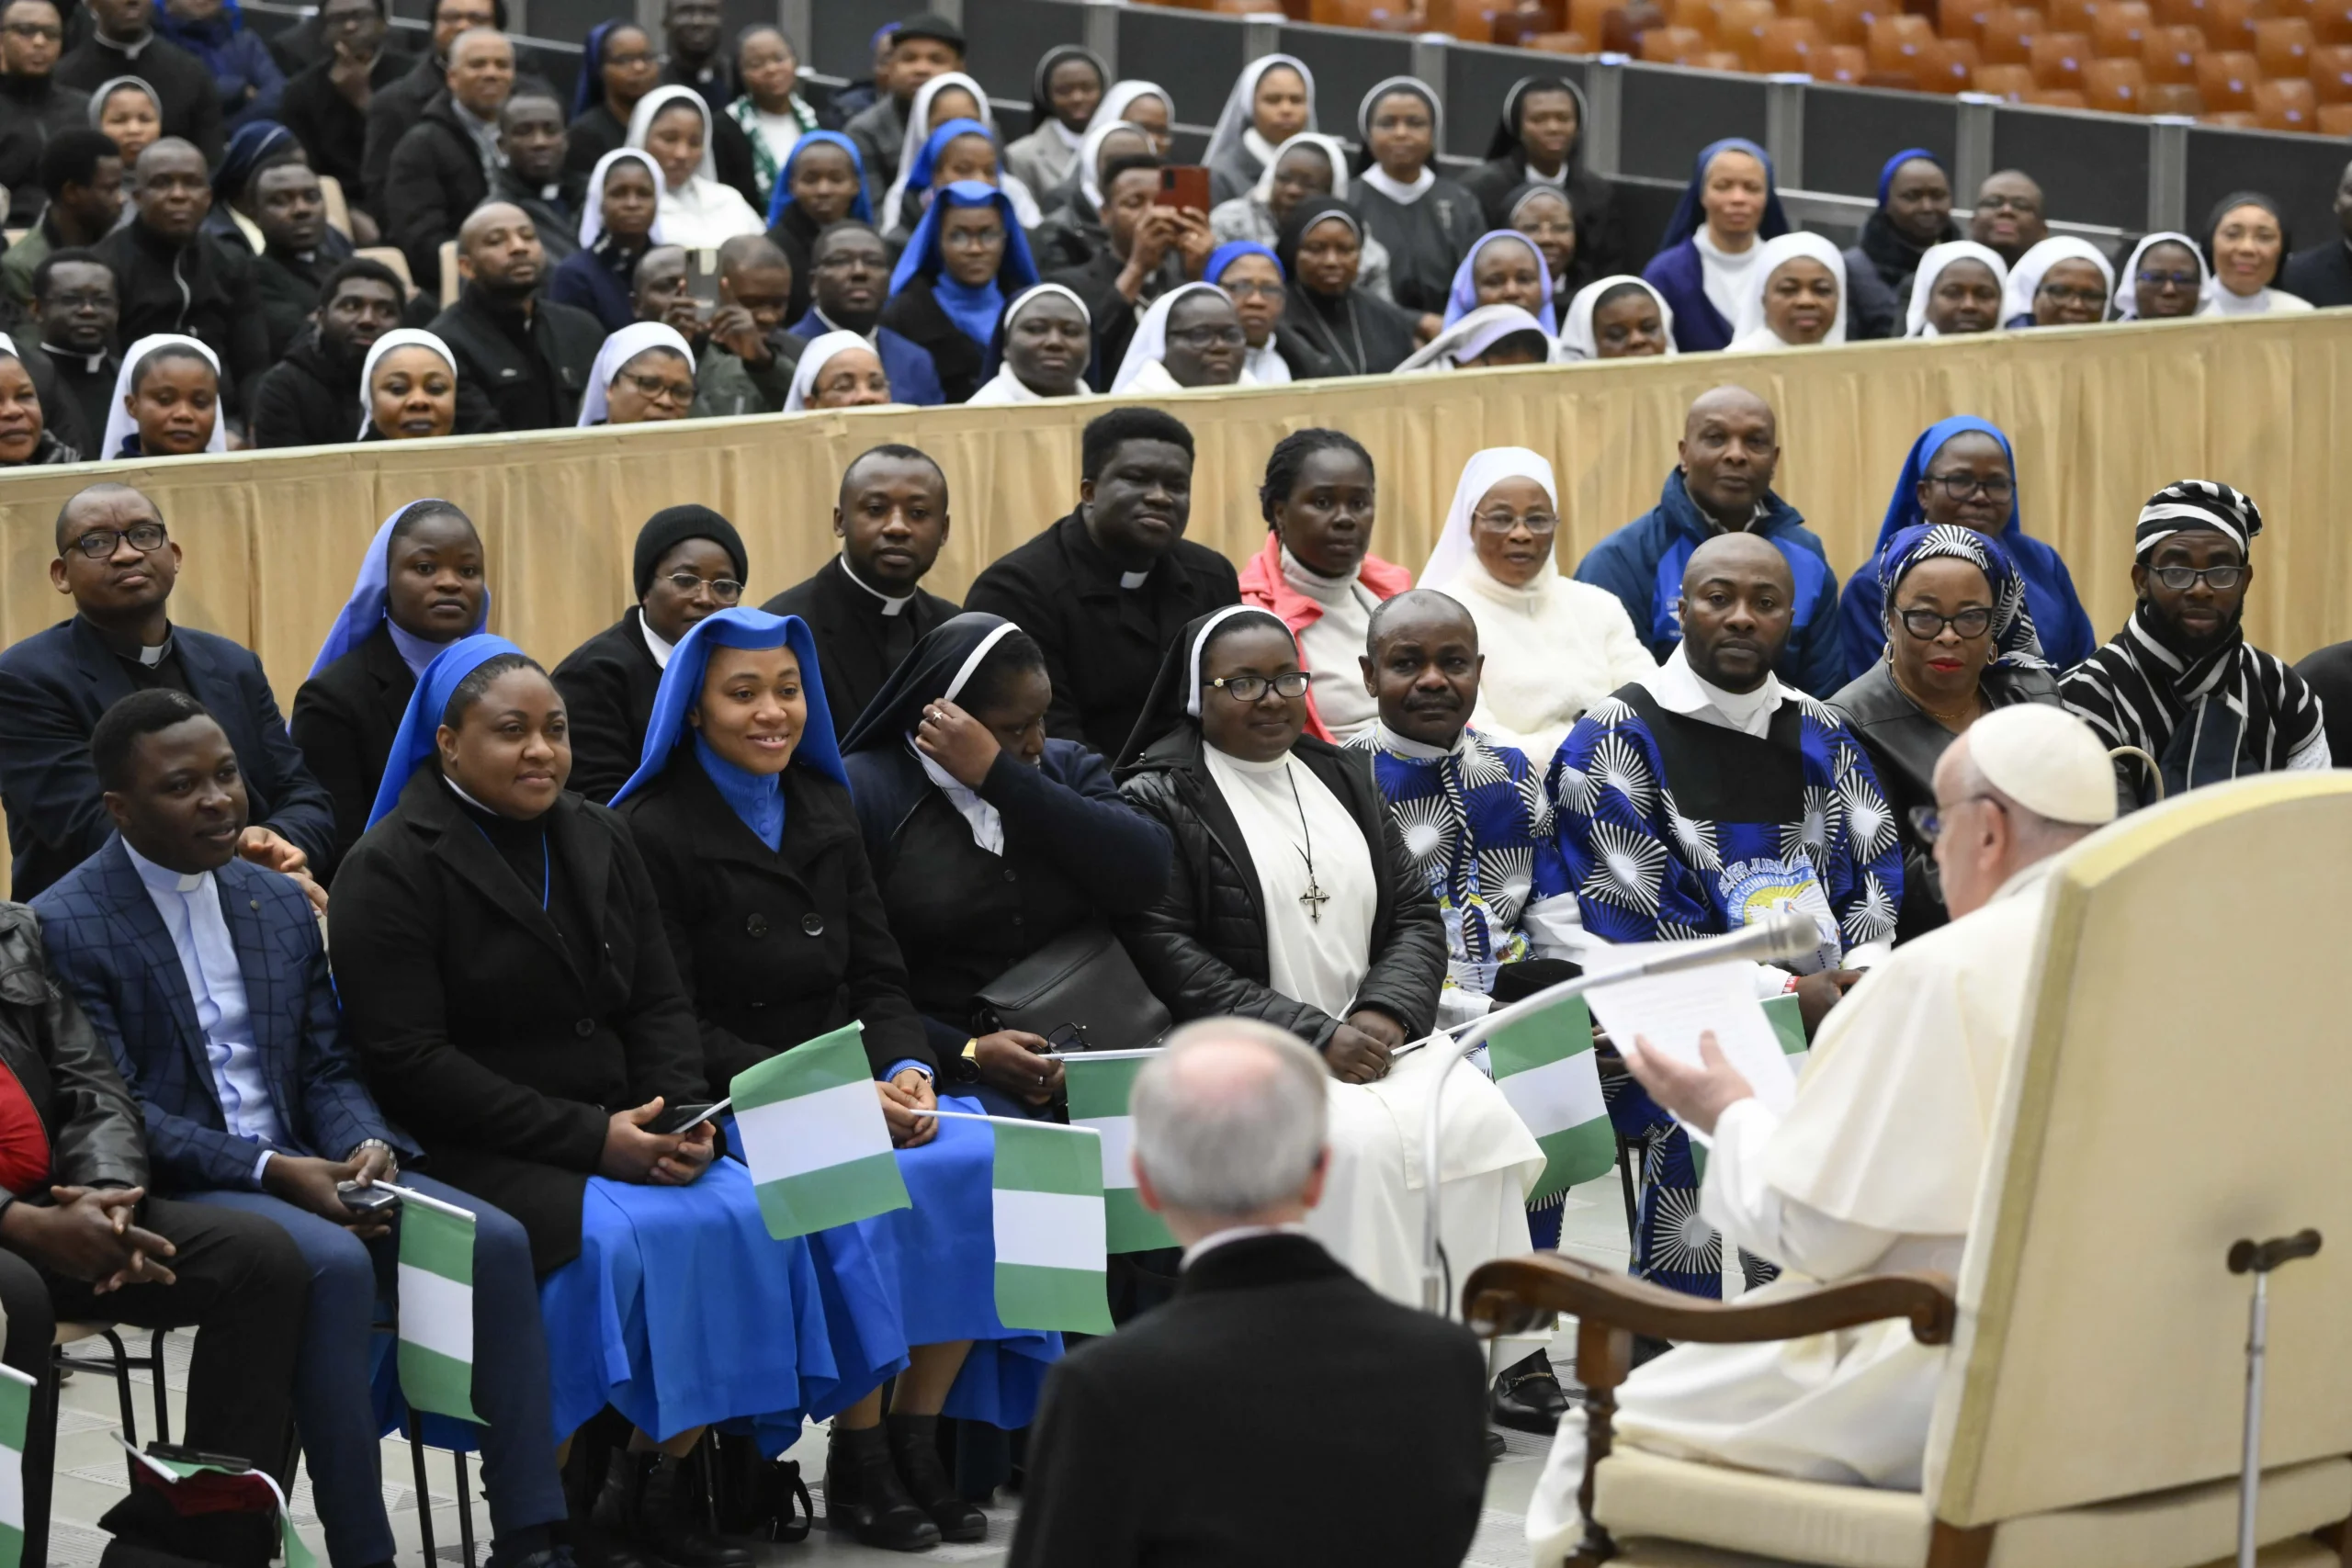 THE POPE ADDRESSES NIGERIA PRIESTS AND RELIGIOUS